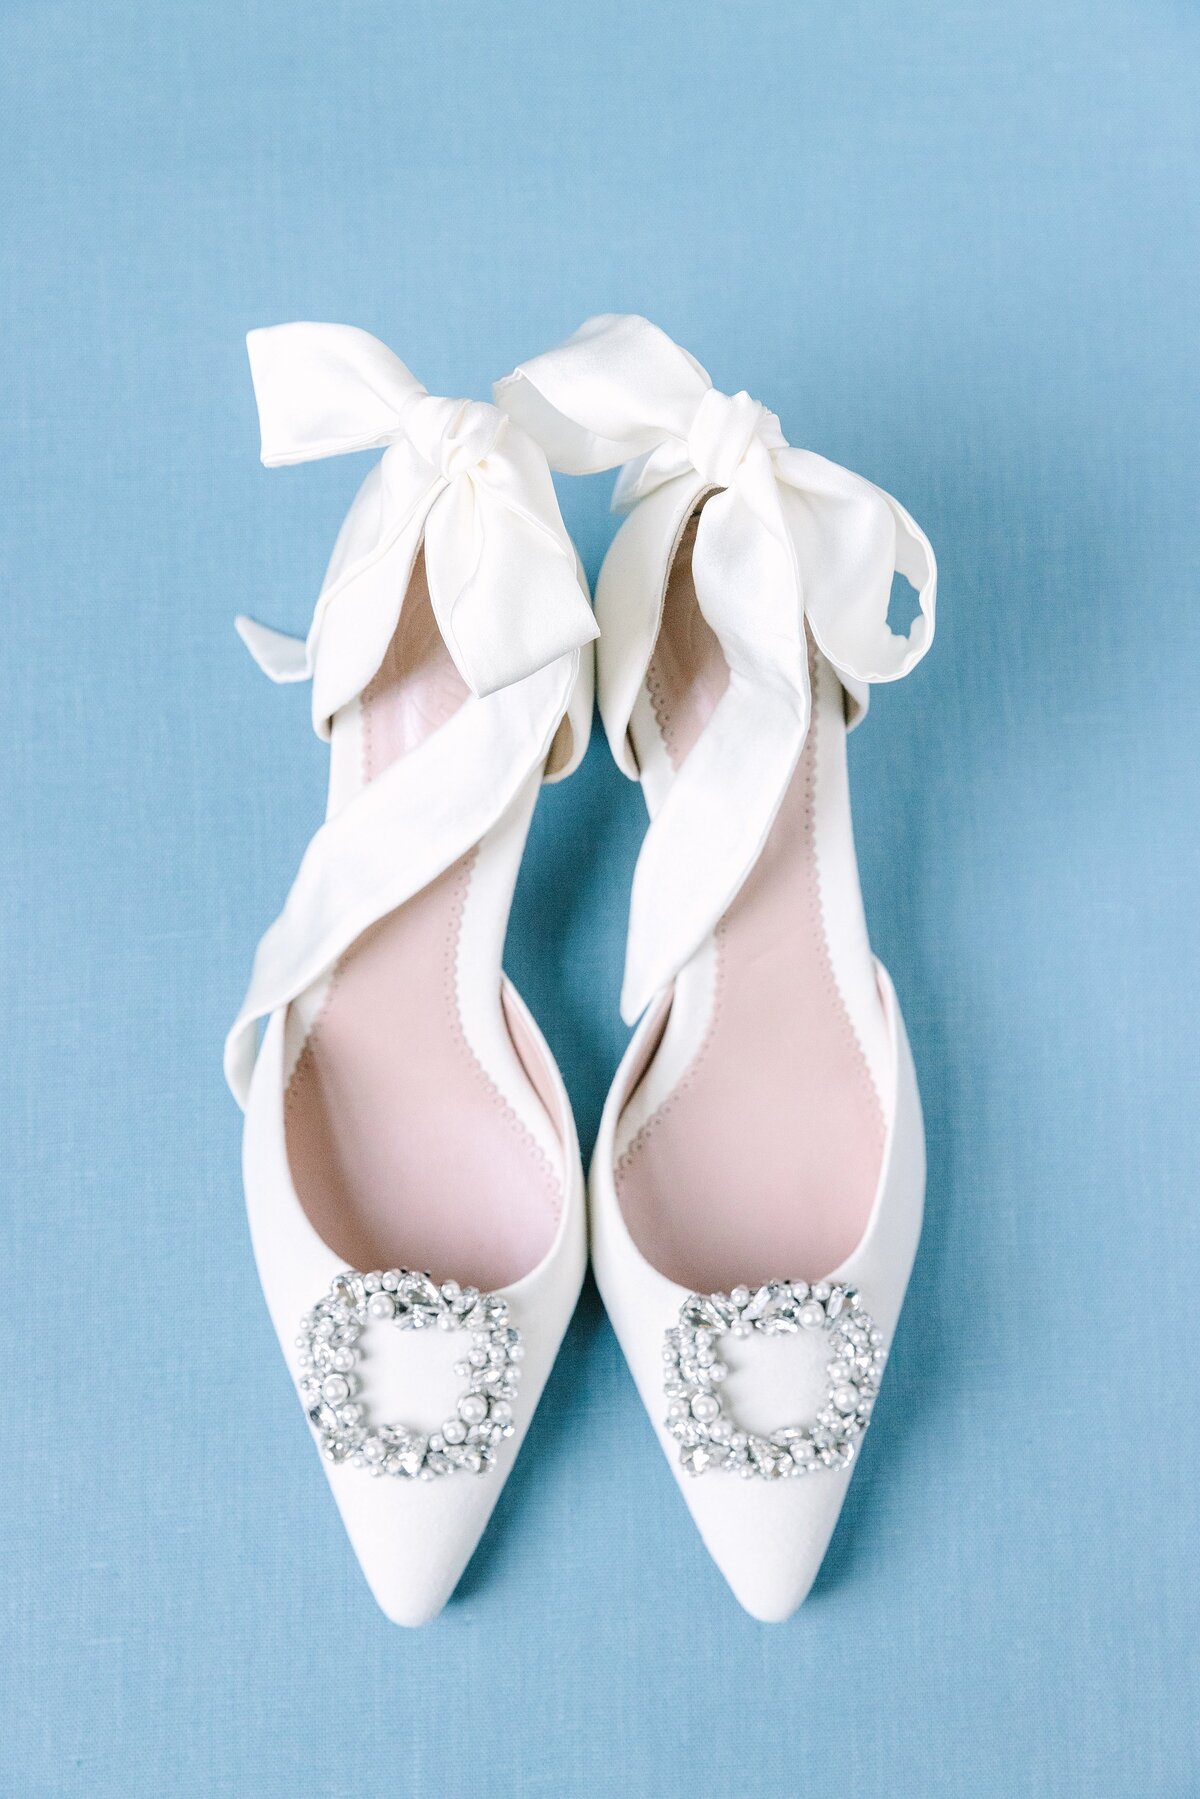 detail photo of white wedding shoes with ribbon tie ankle straps